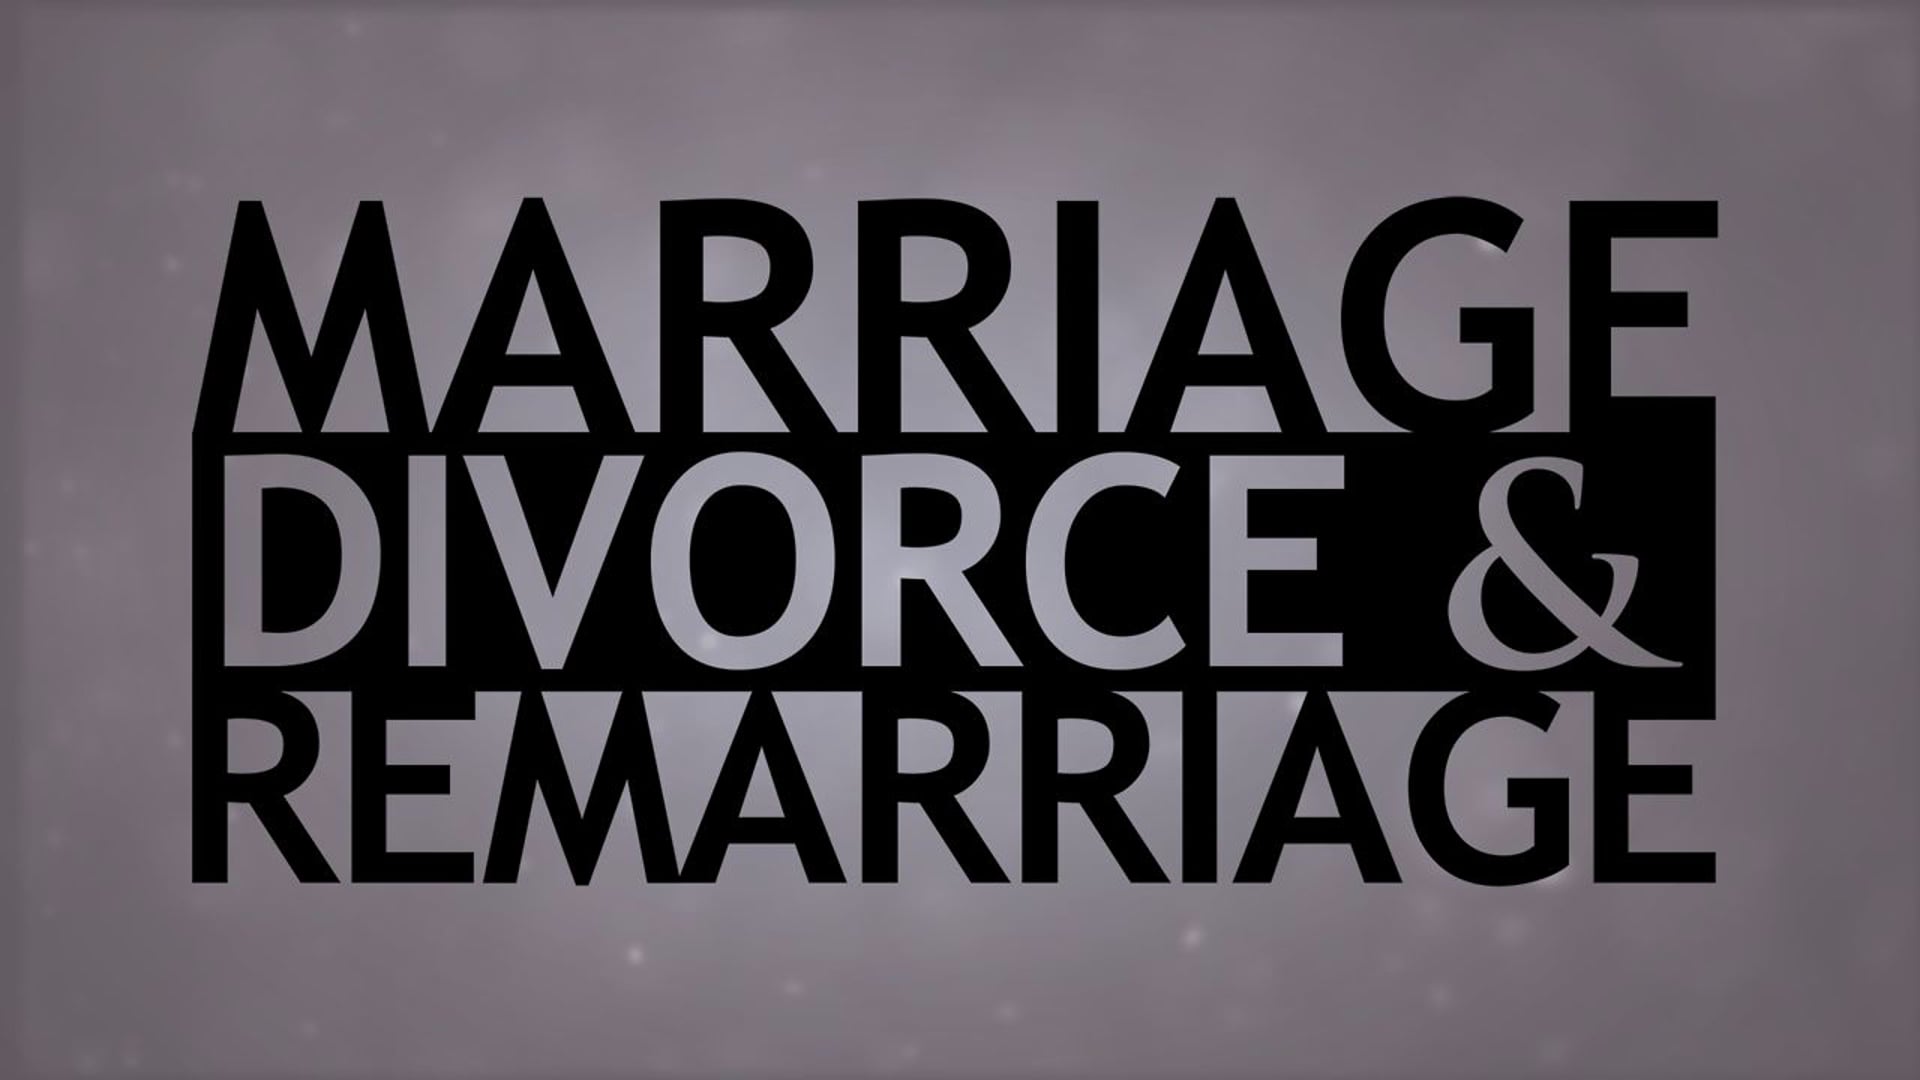 The Truth About... Marriage, Divorce and Remarriage